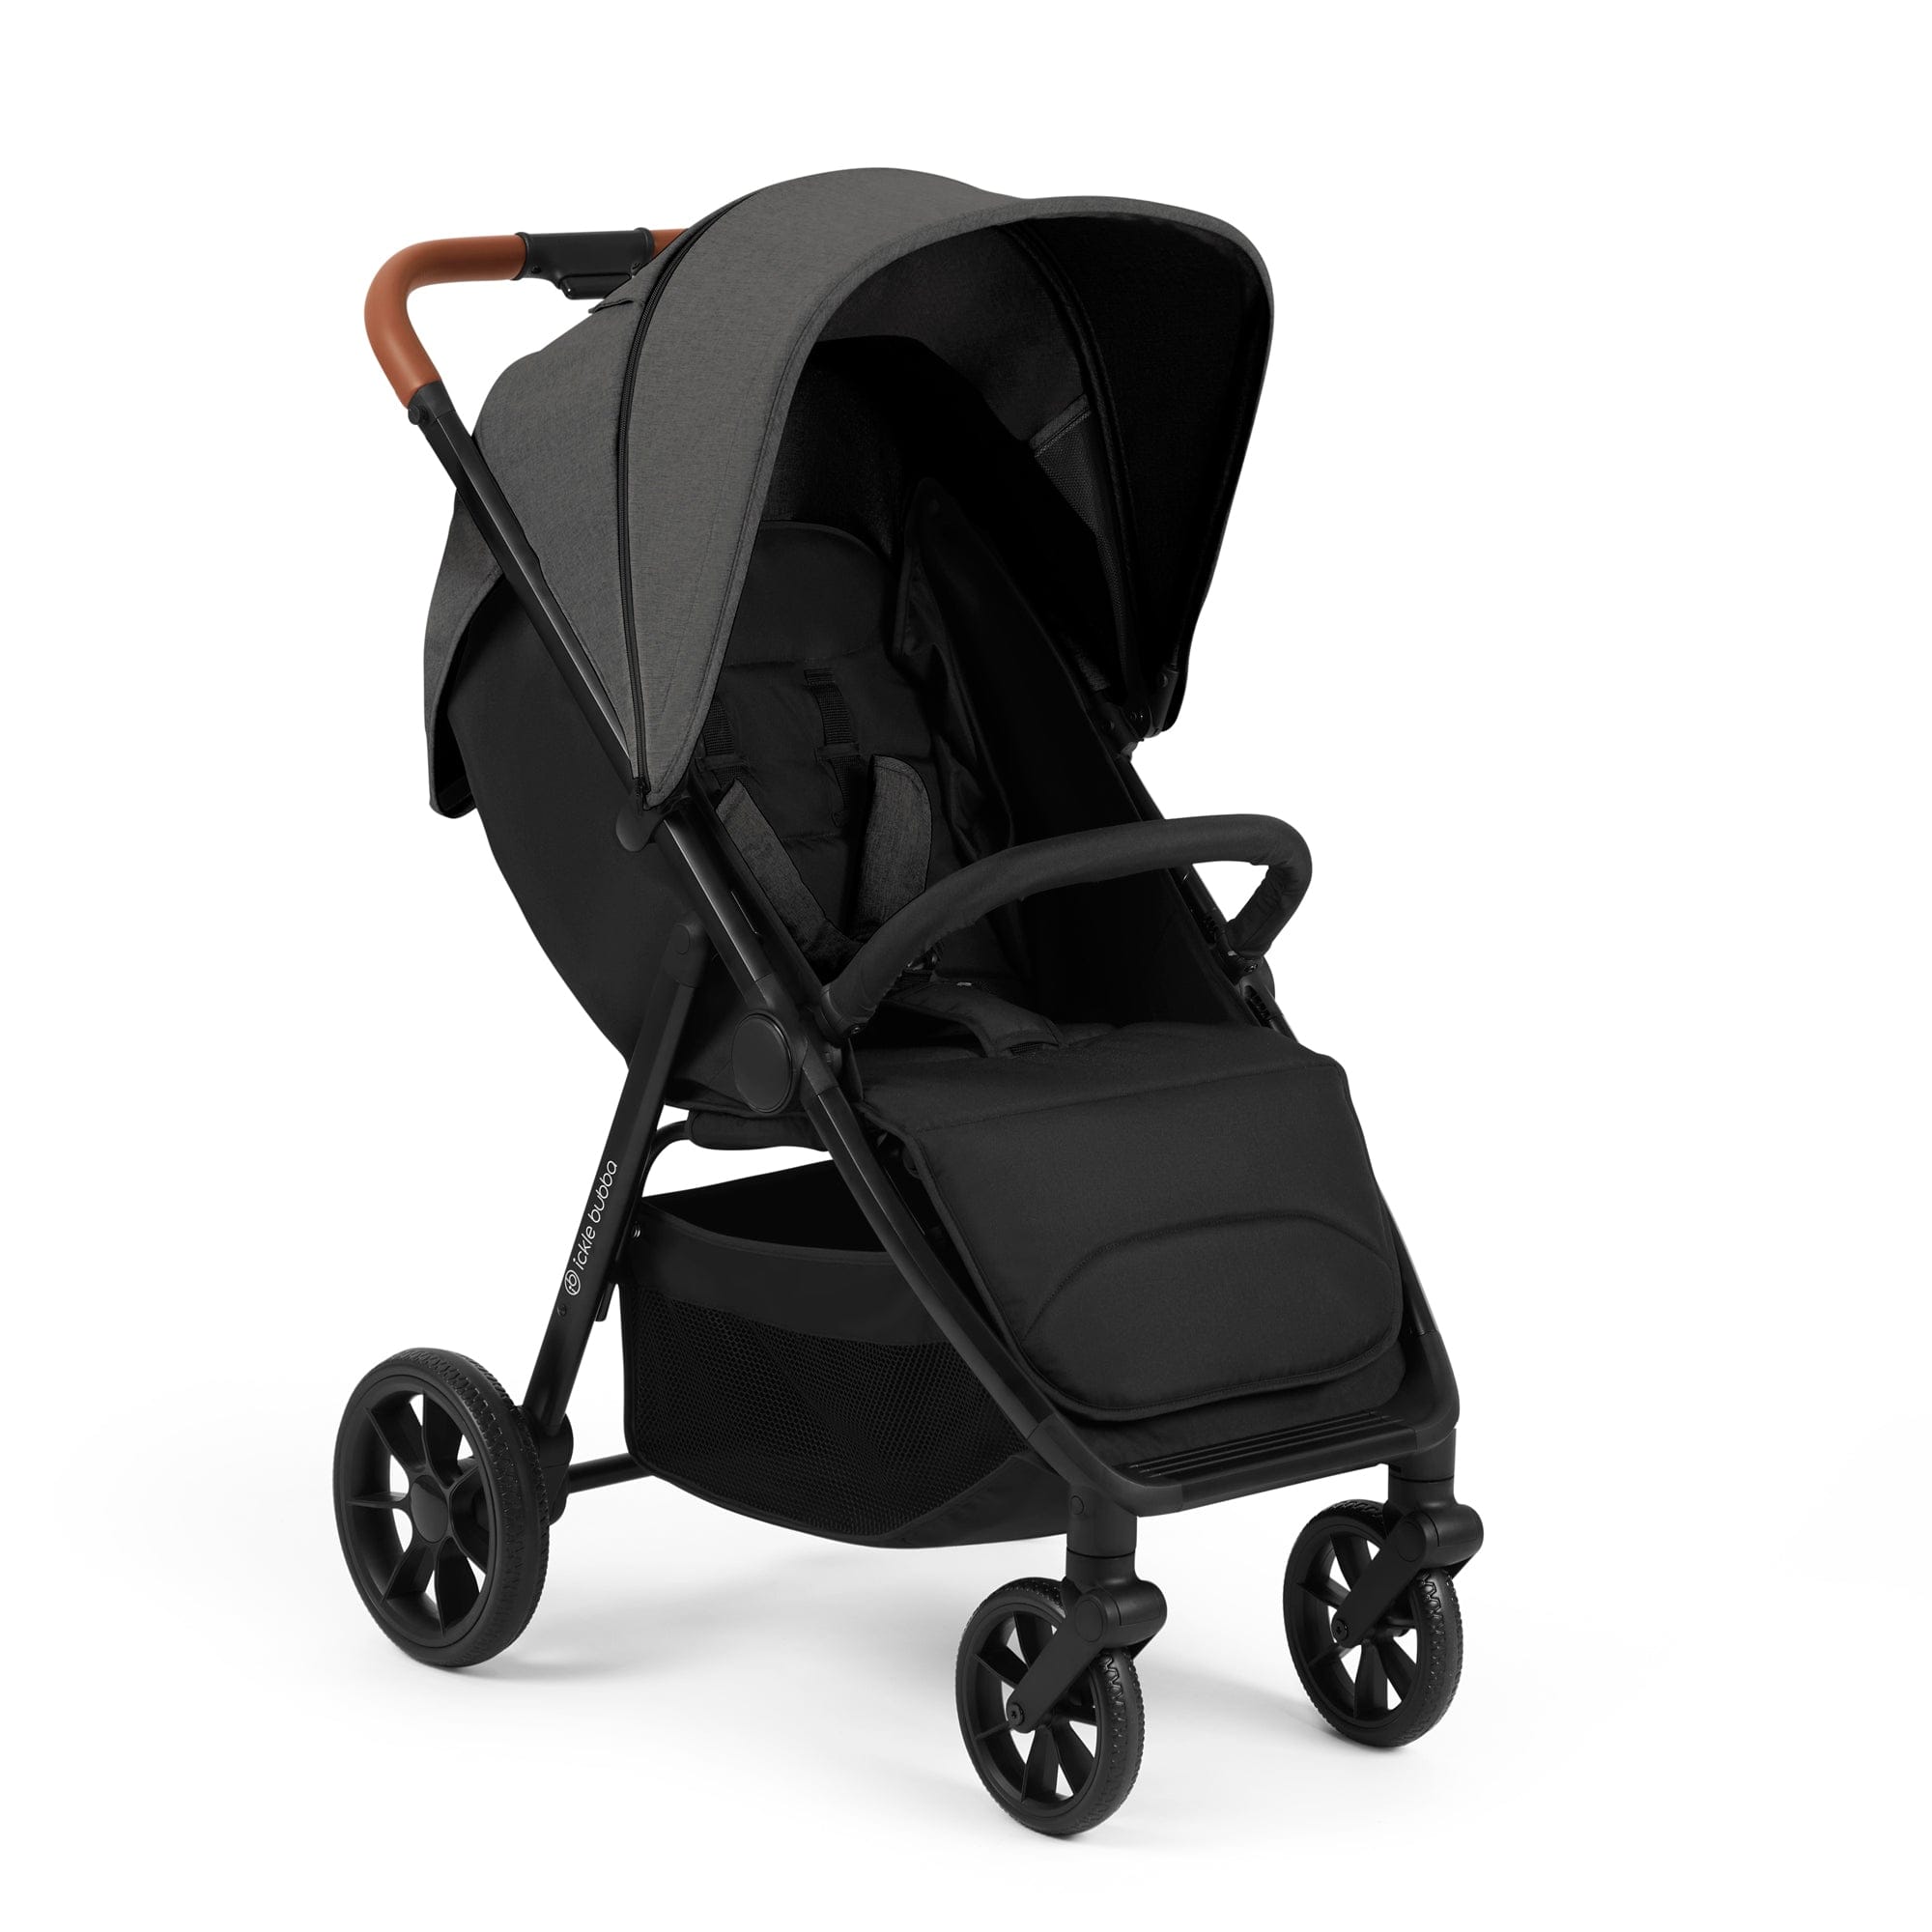 STOMP STRIDE MAX STROLLER in Charcoal Grey Pushchairs & Buggies 15-006-200-148 5056515033878